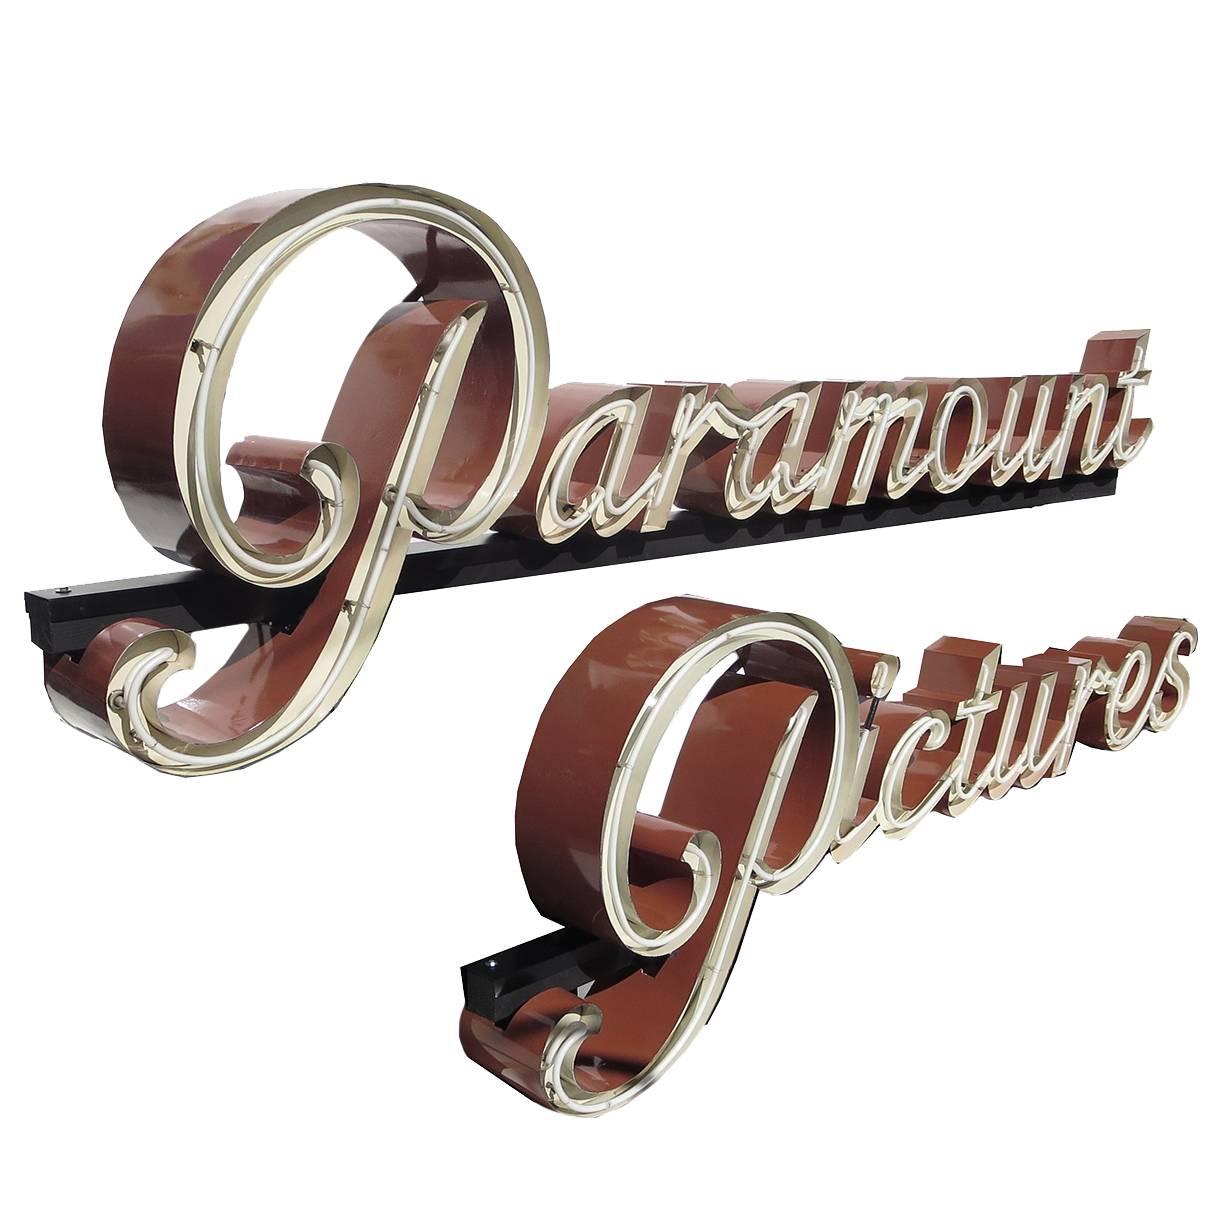 Historic Paramount Pictures Sign in Porcelain Enamel and Neon